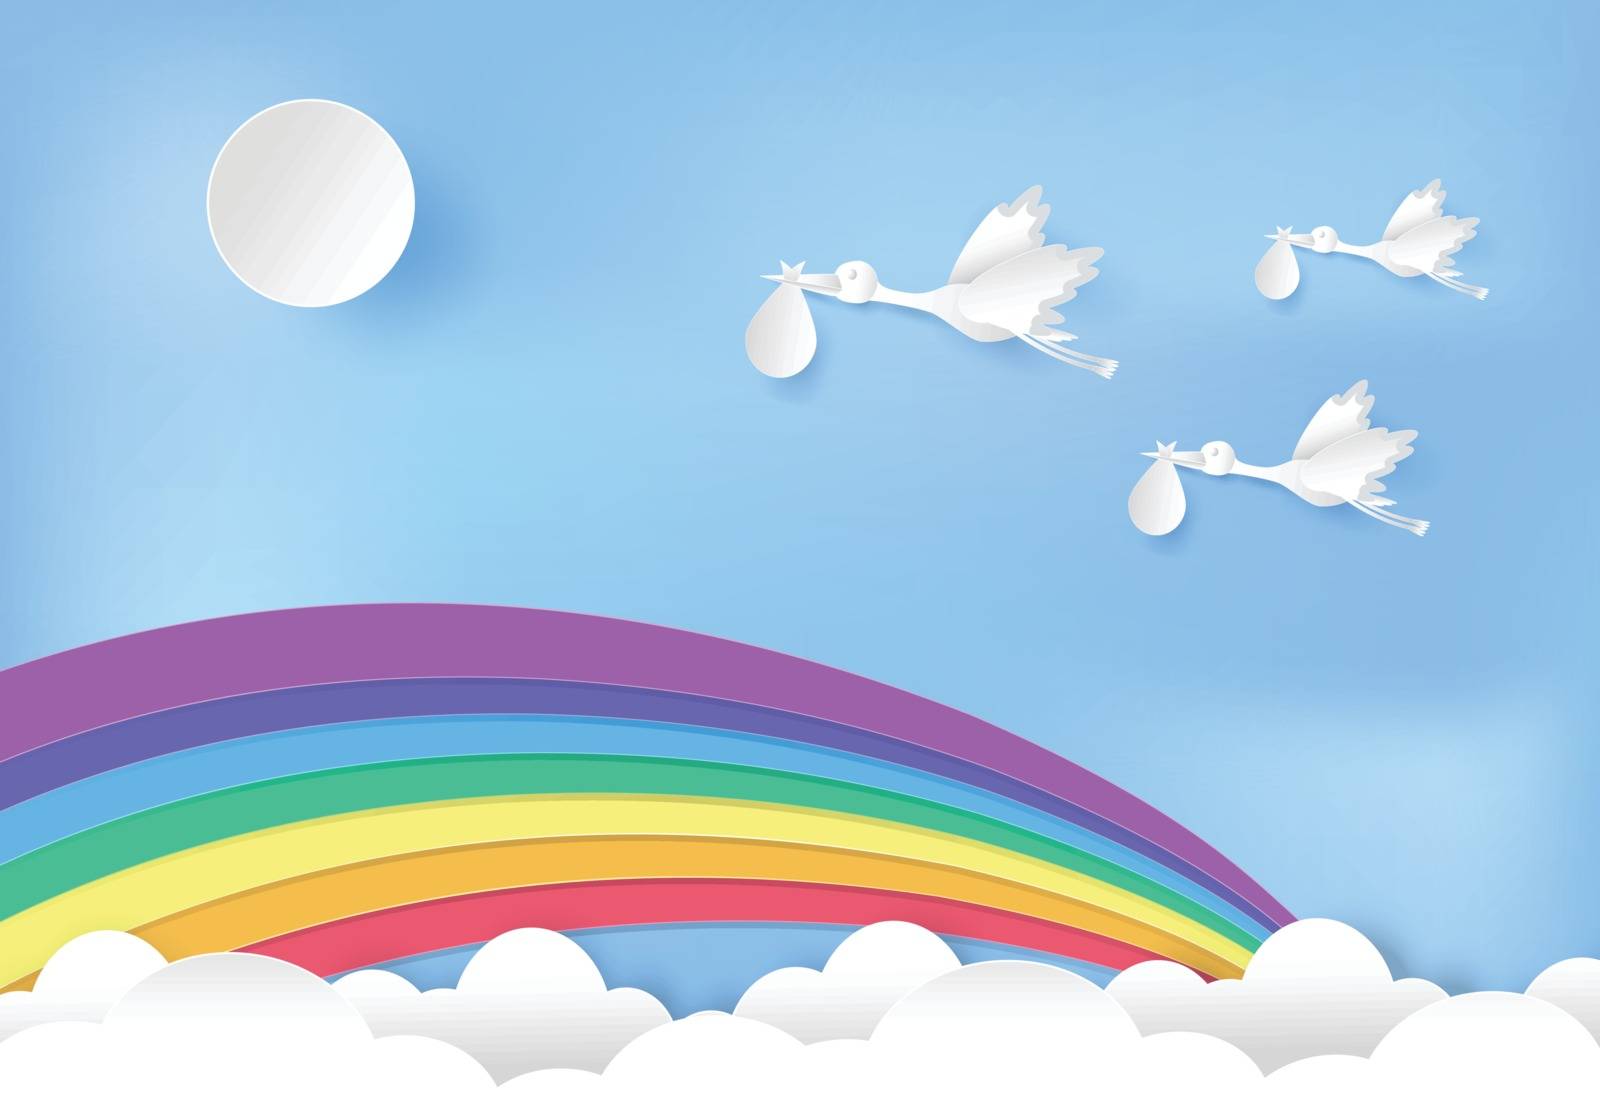 Paper art of stork flying with baby and rainbow on blue sky paper cut style illustration